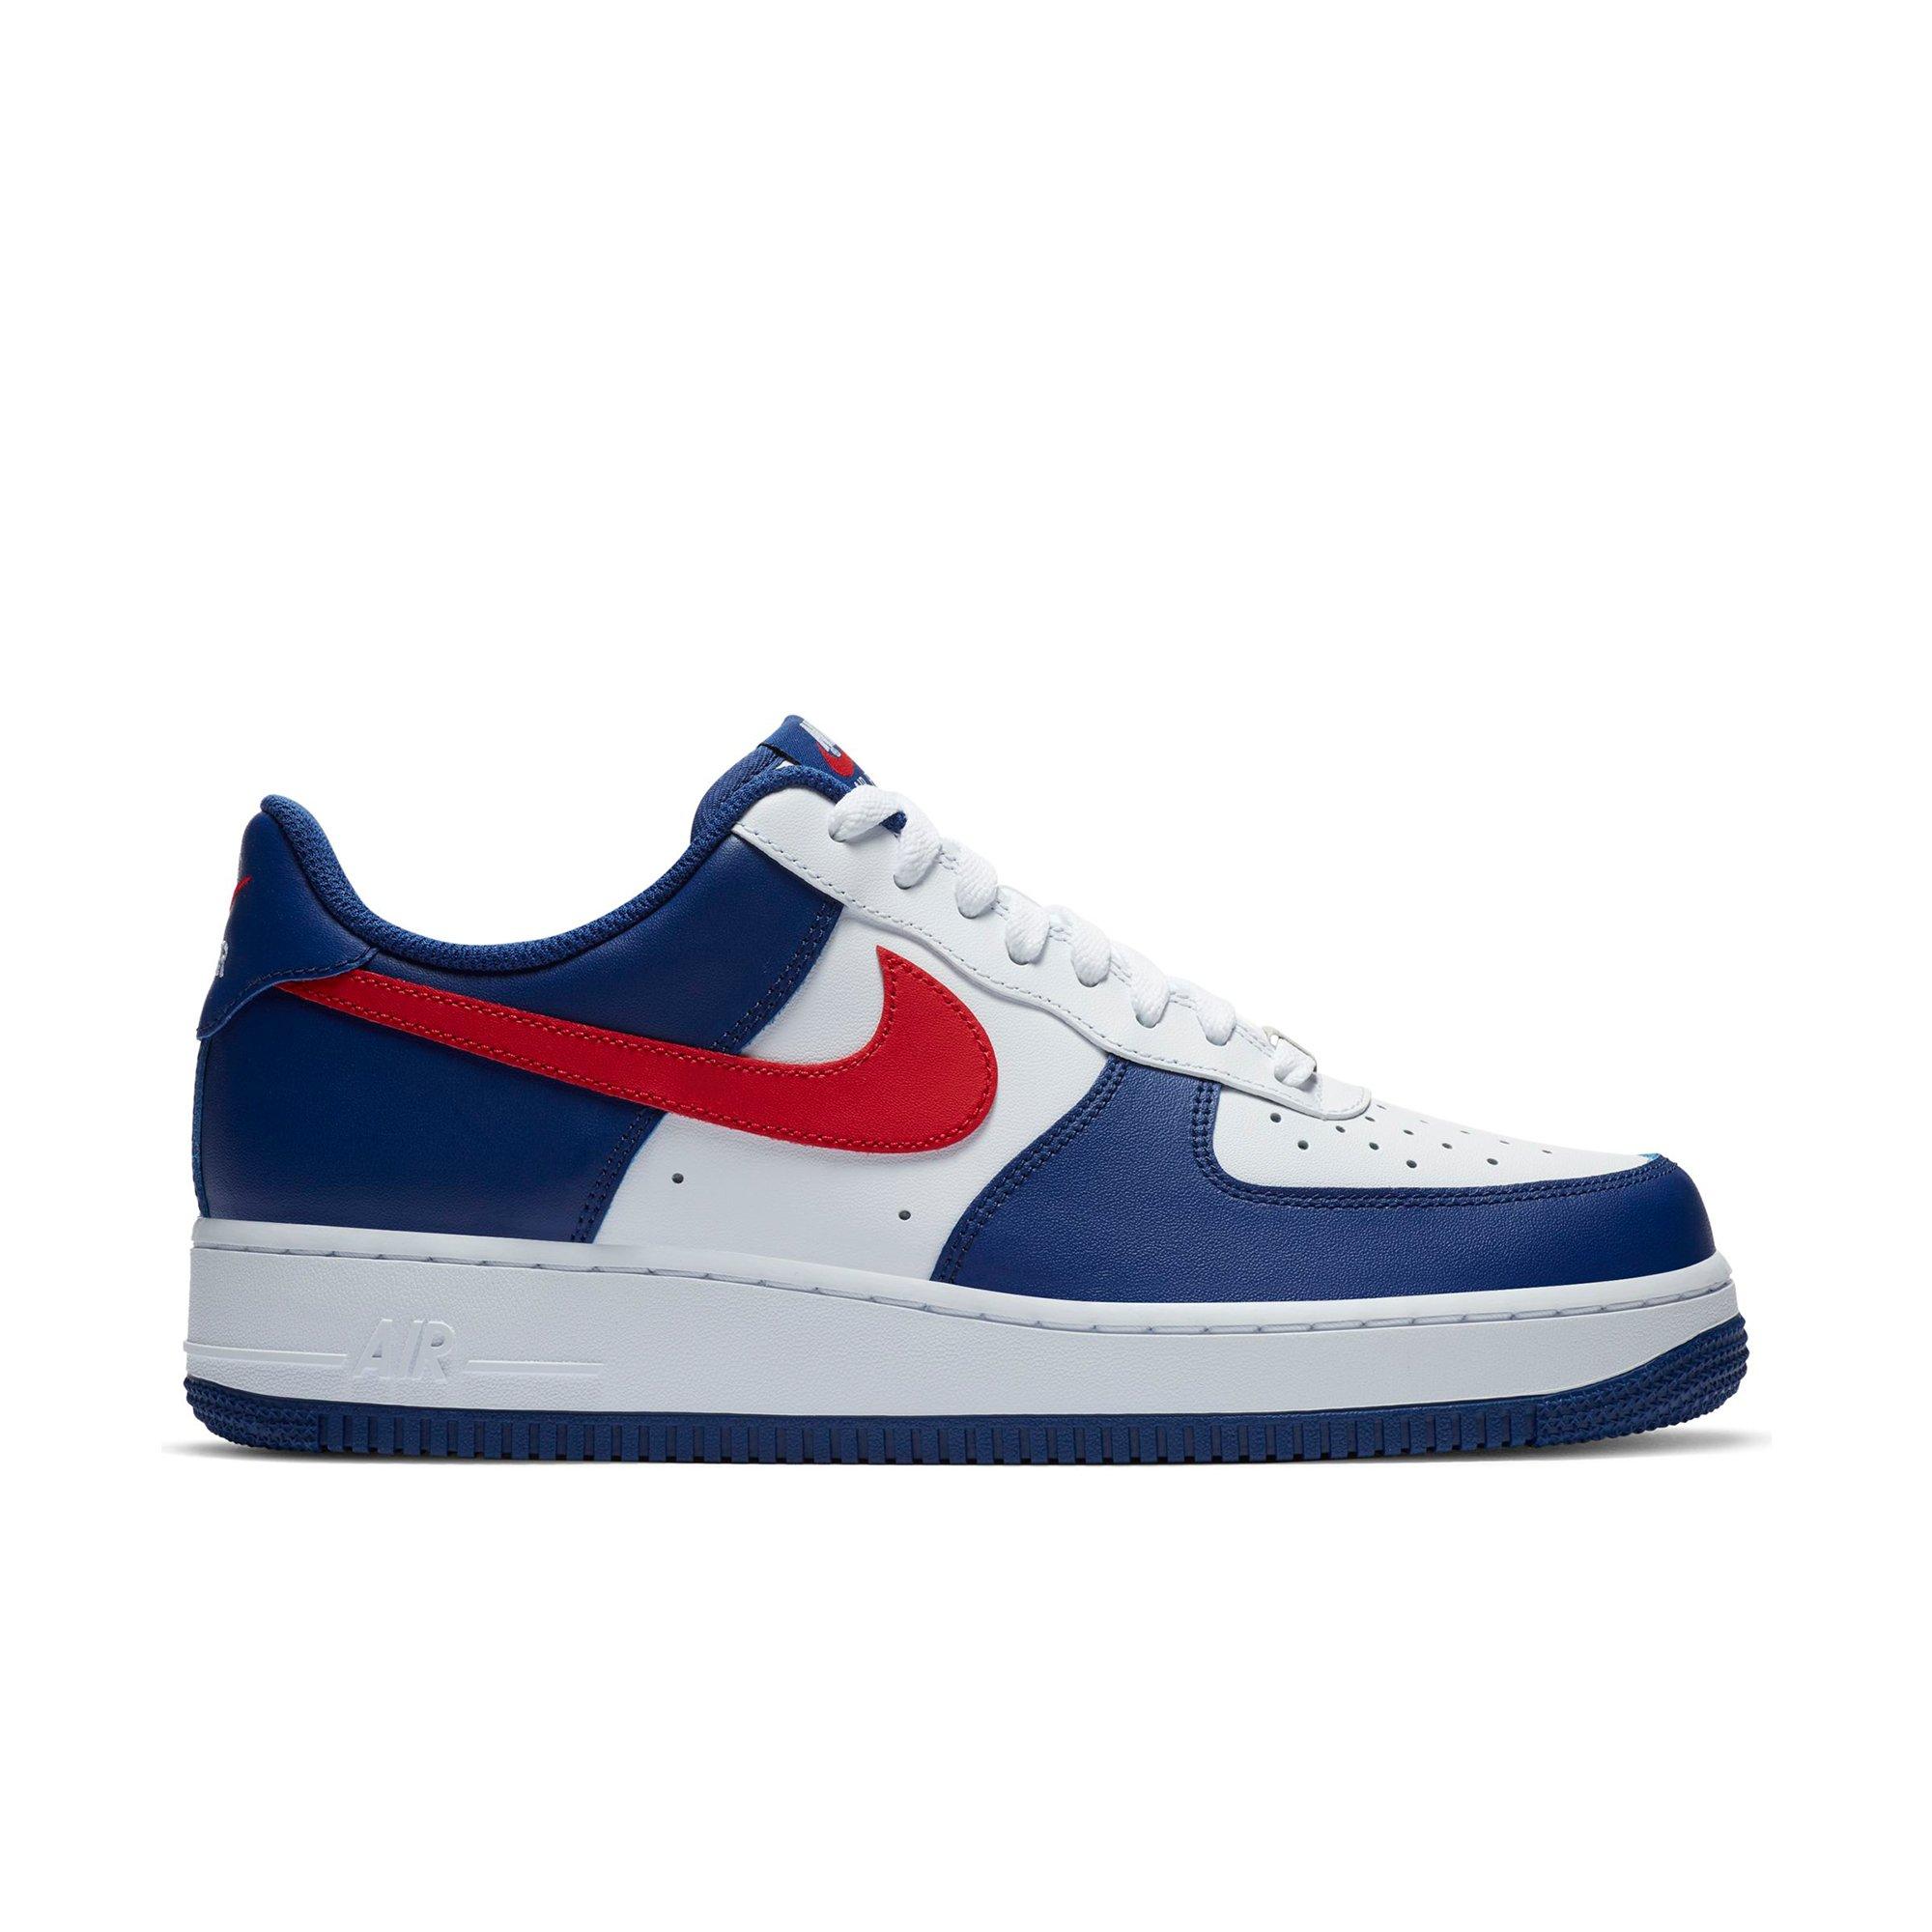 air force 1s blue and red